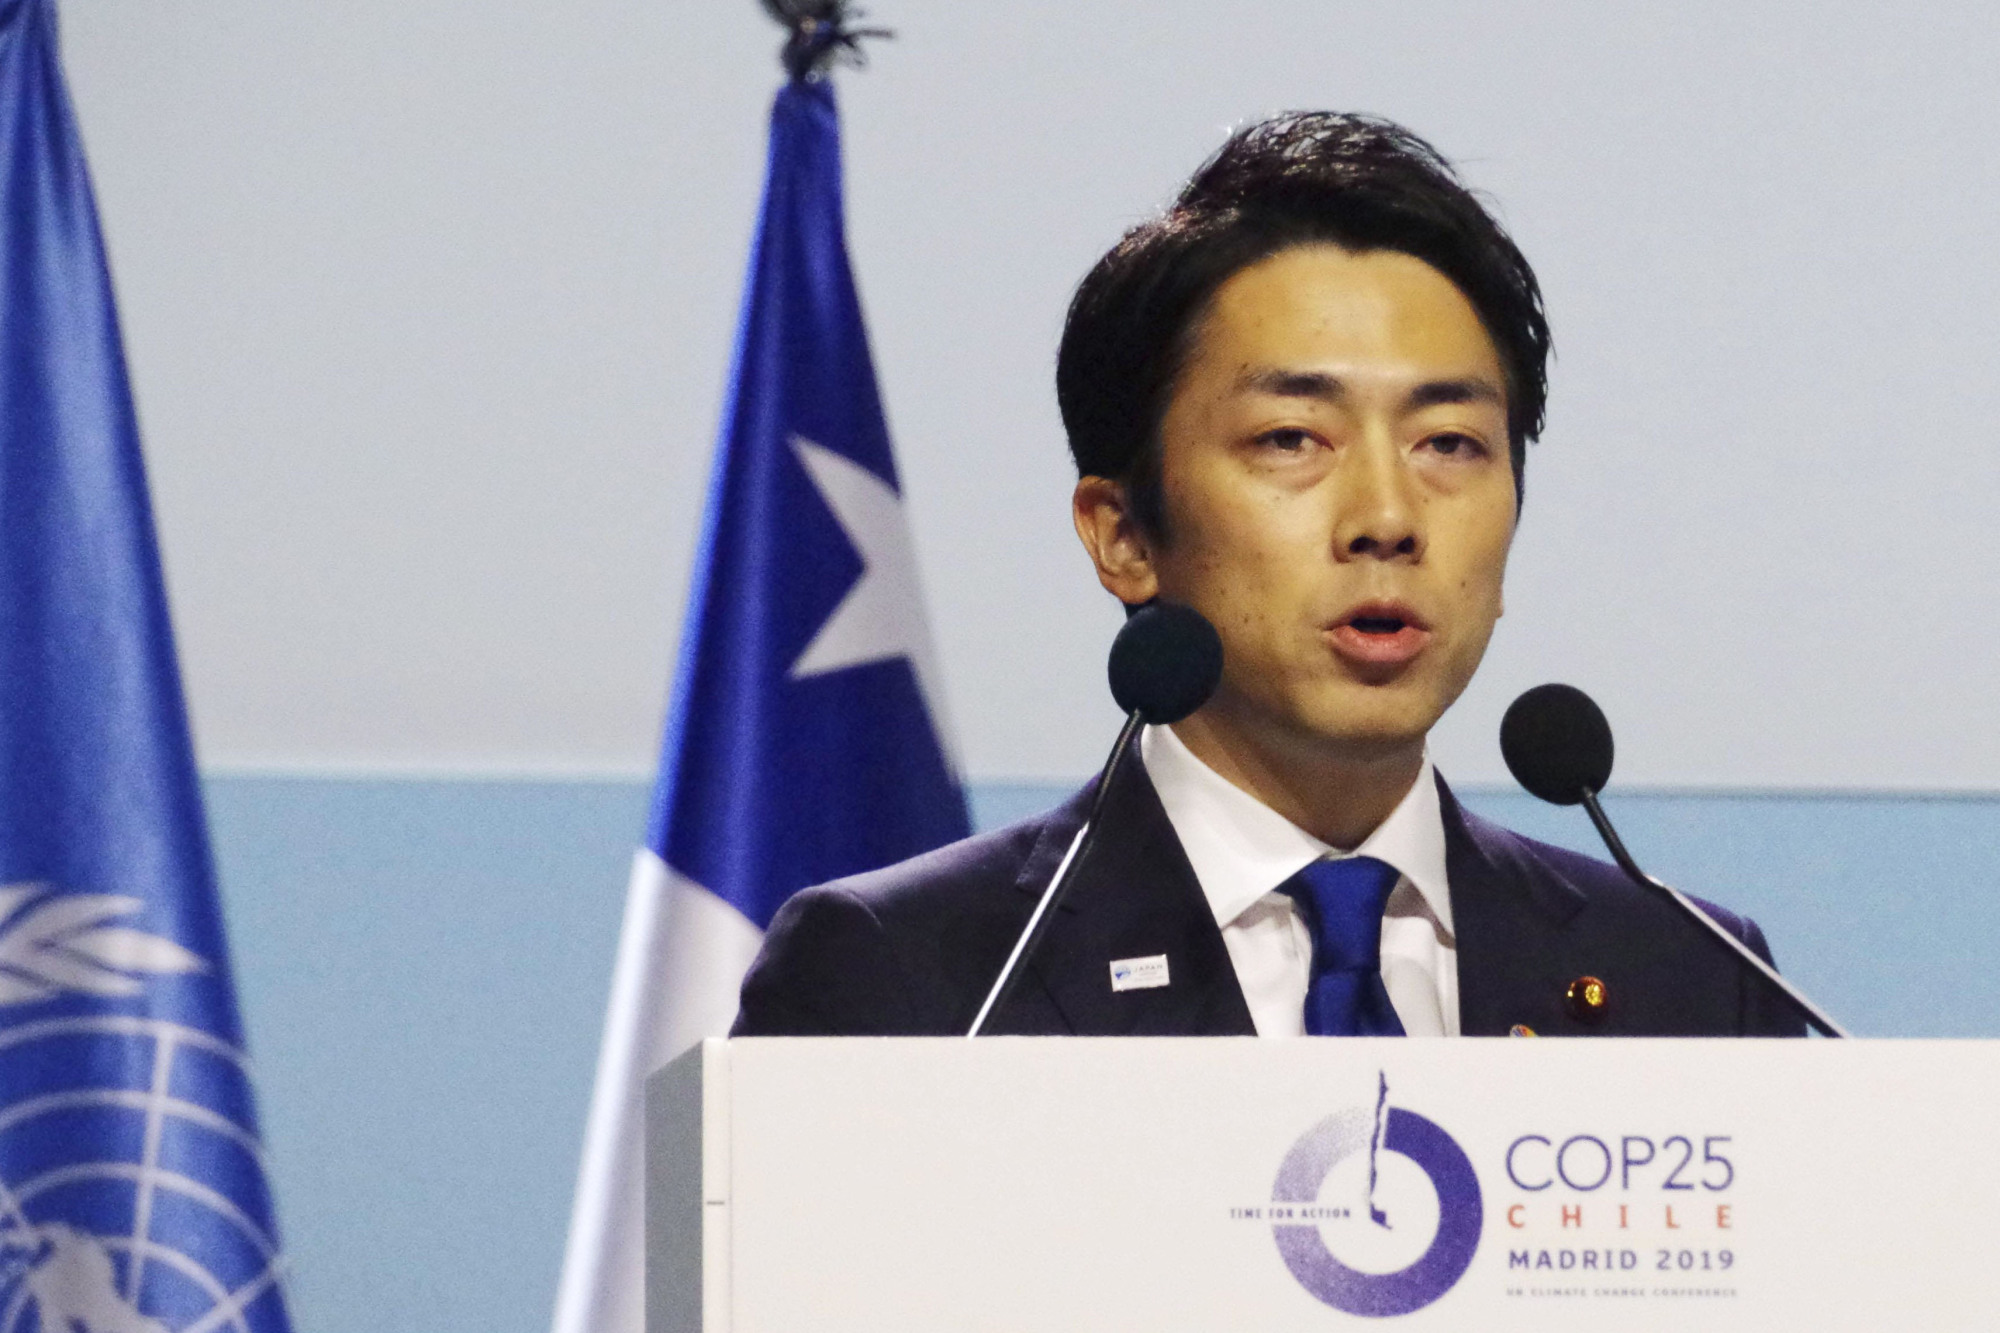 Environment Minister Shinjiro Koizumi makes a speech at a U.N. climate conference in Madrid on Wednesday. | KYODO